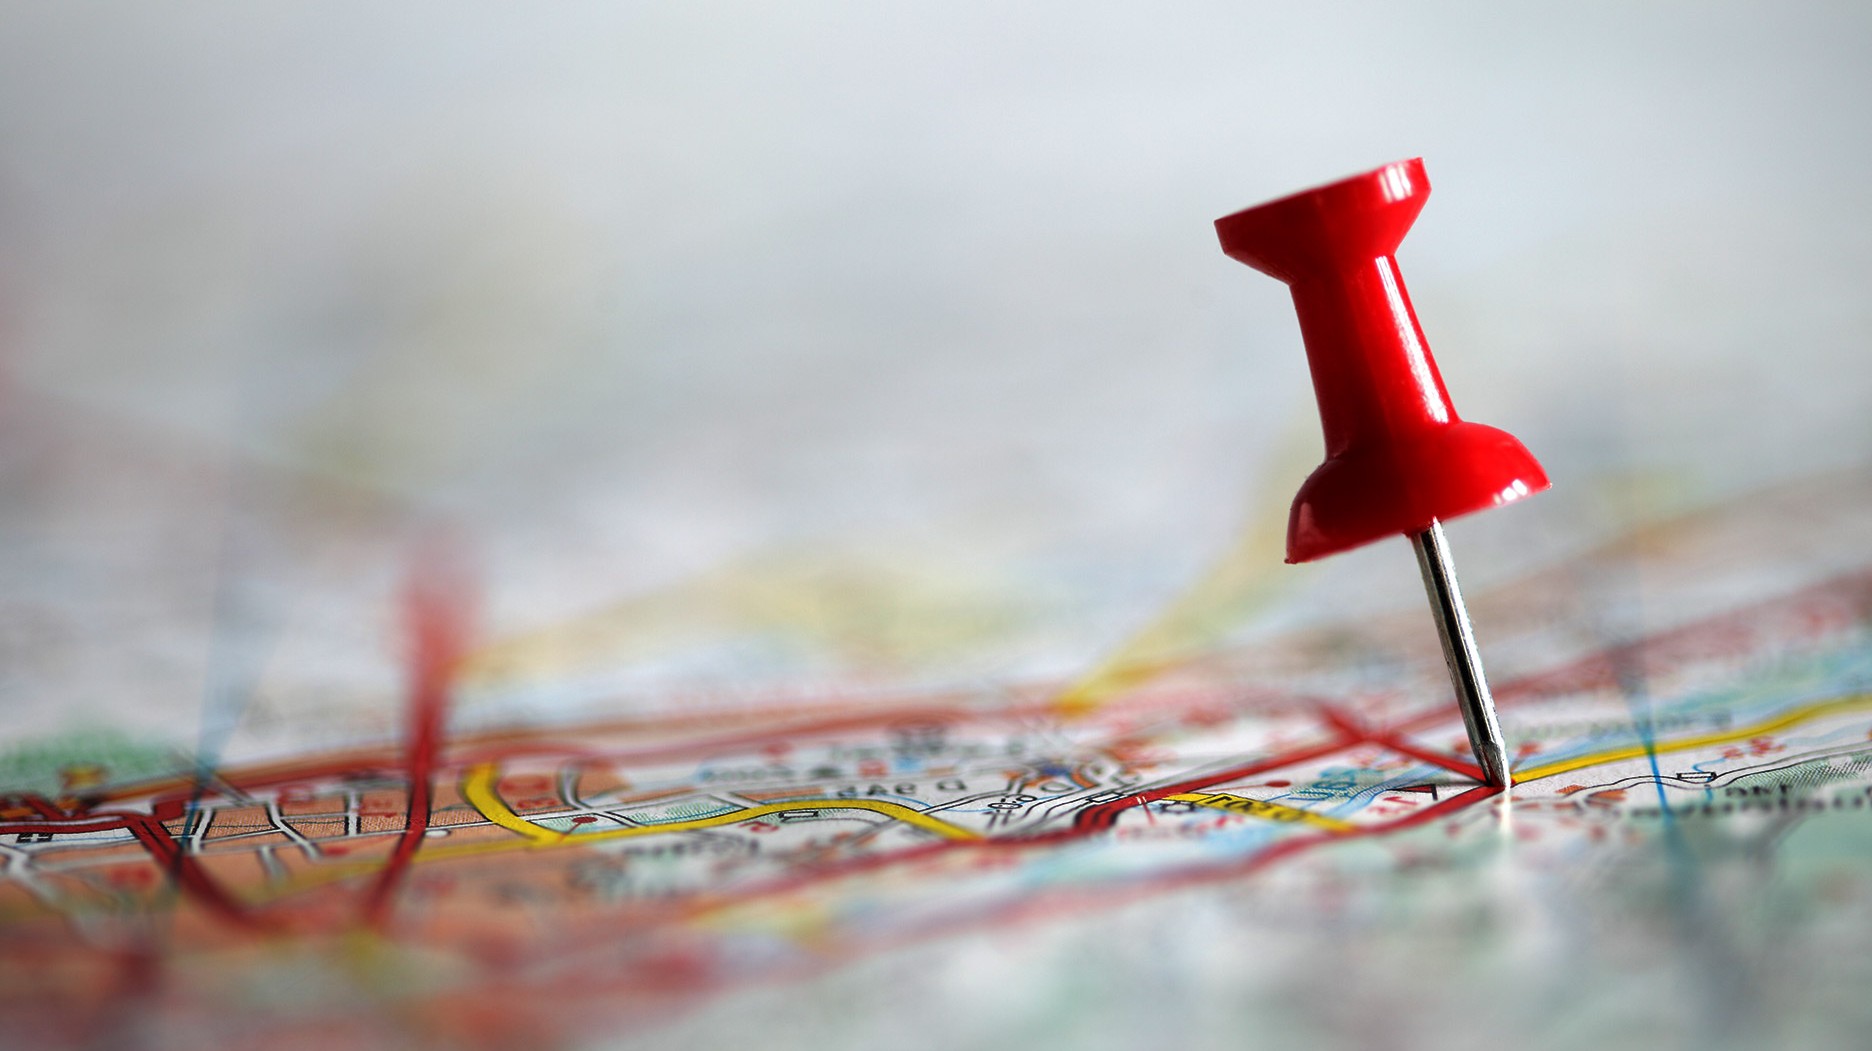 Map With Pins Stock Photo - Download Image Now - iStock